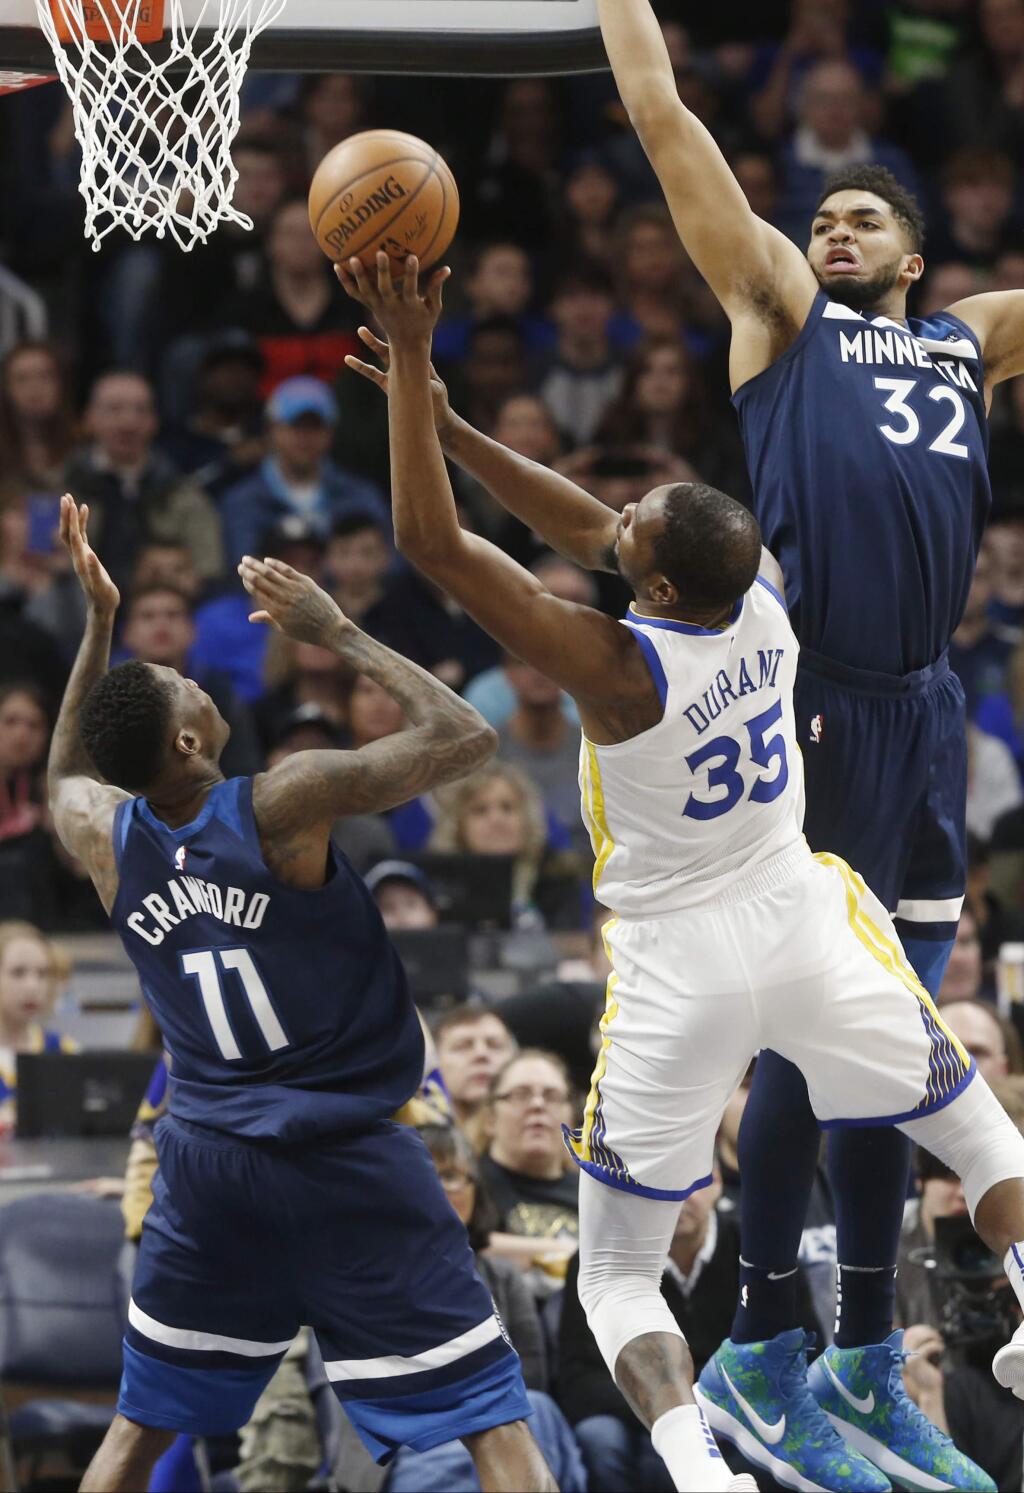 Golden State Warriors' Kevin Durant, center, shoots between Minnesota Timberwolves' Jamal Crawford, left, and Karl-Anthony Towns in the first half of an NBA basketball game Sunday, March 11, 2018, in Minneapolis. (AP Photo/Jim Mone)